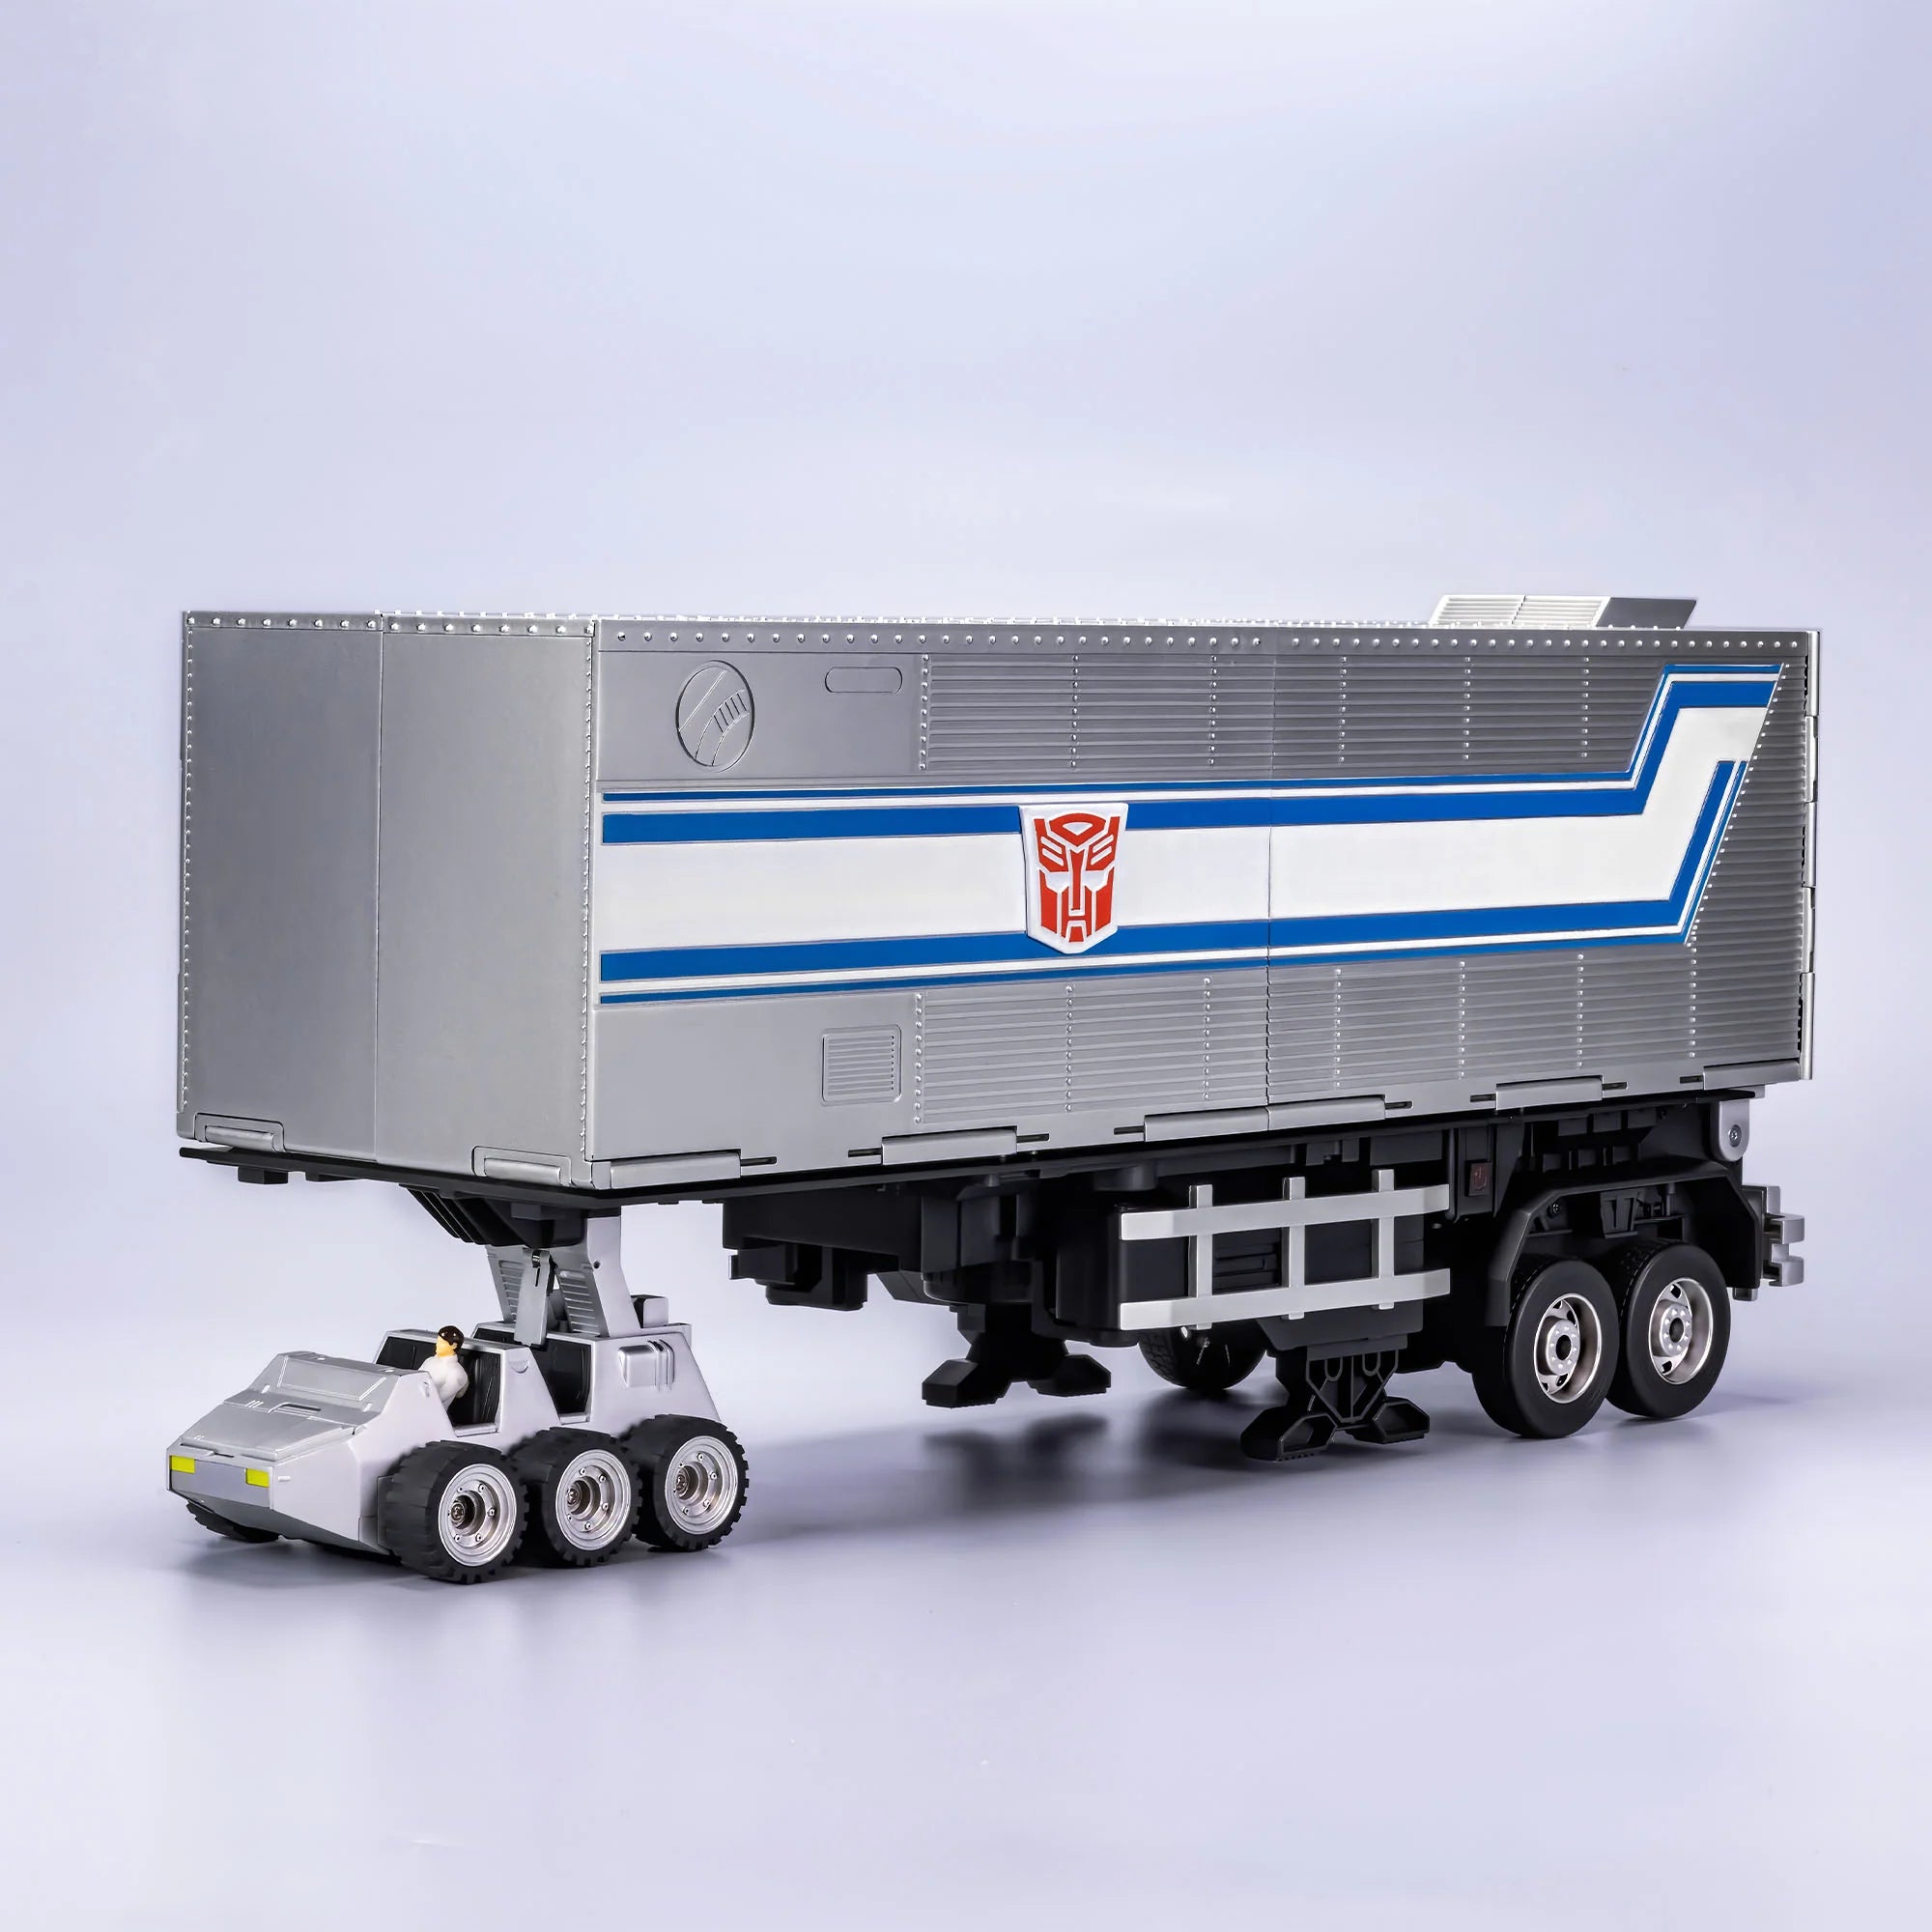 Transformers Optimus Prime Auto-Converting Trailer with Roller By Robosen